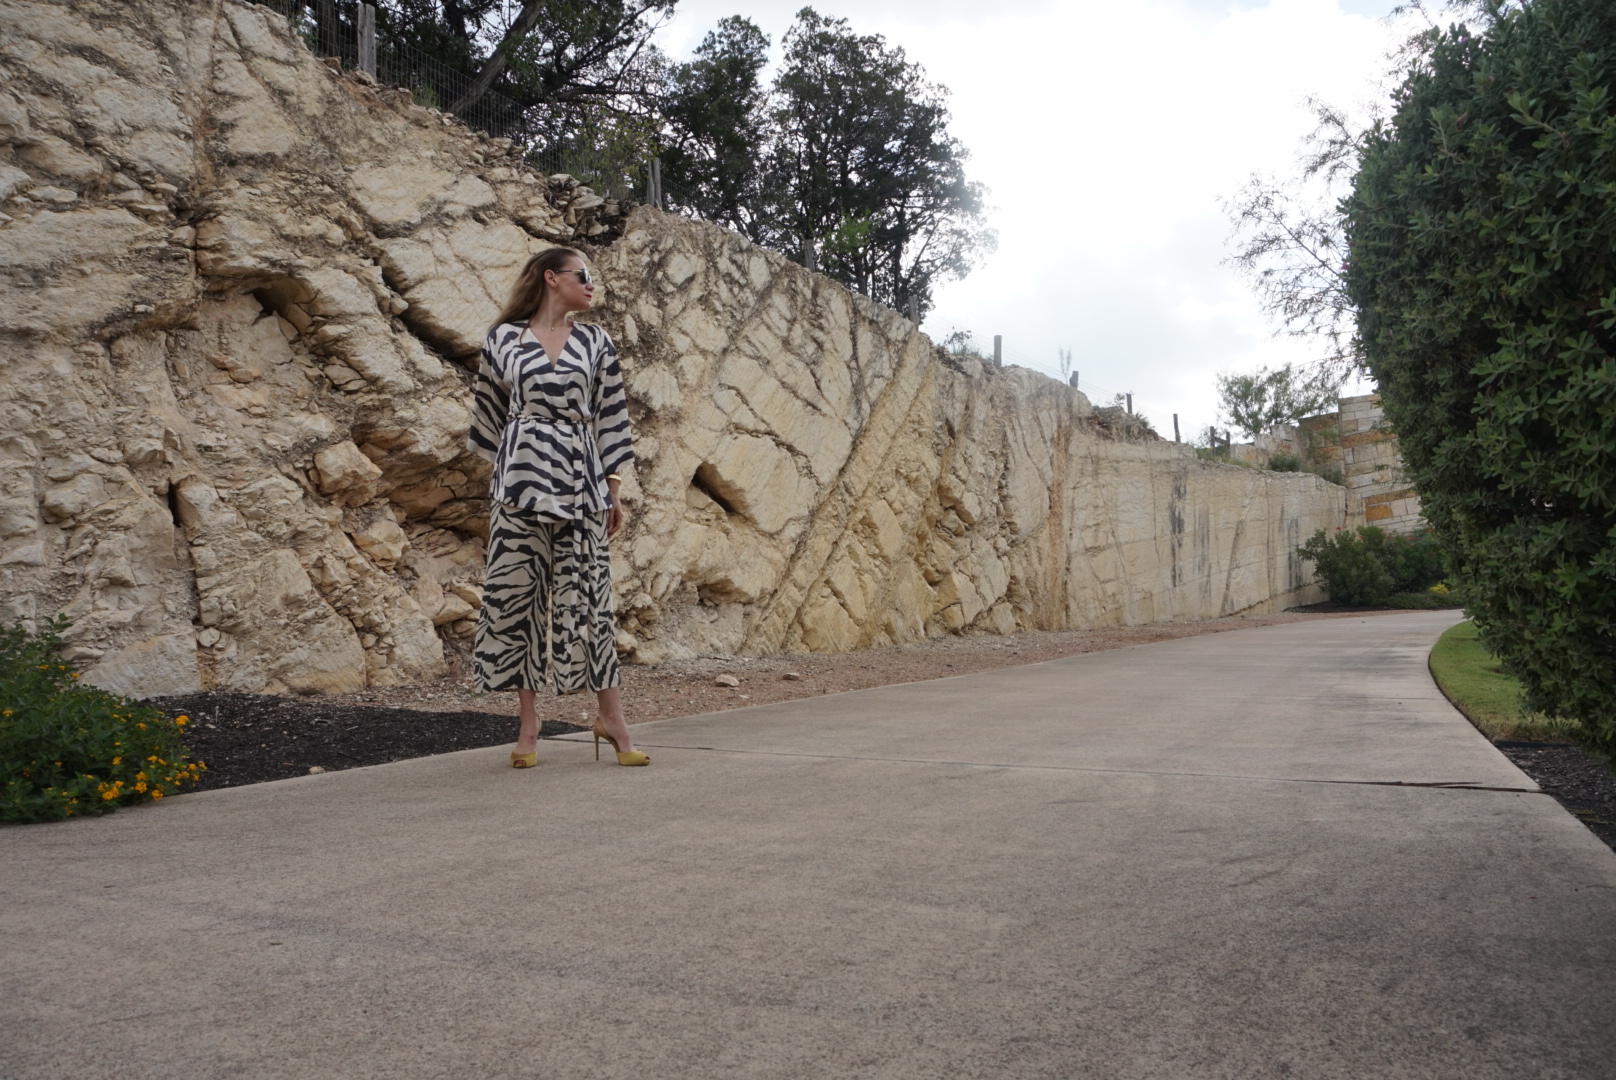 a woman in a zebra suit in front of a stone wall